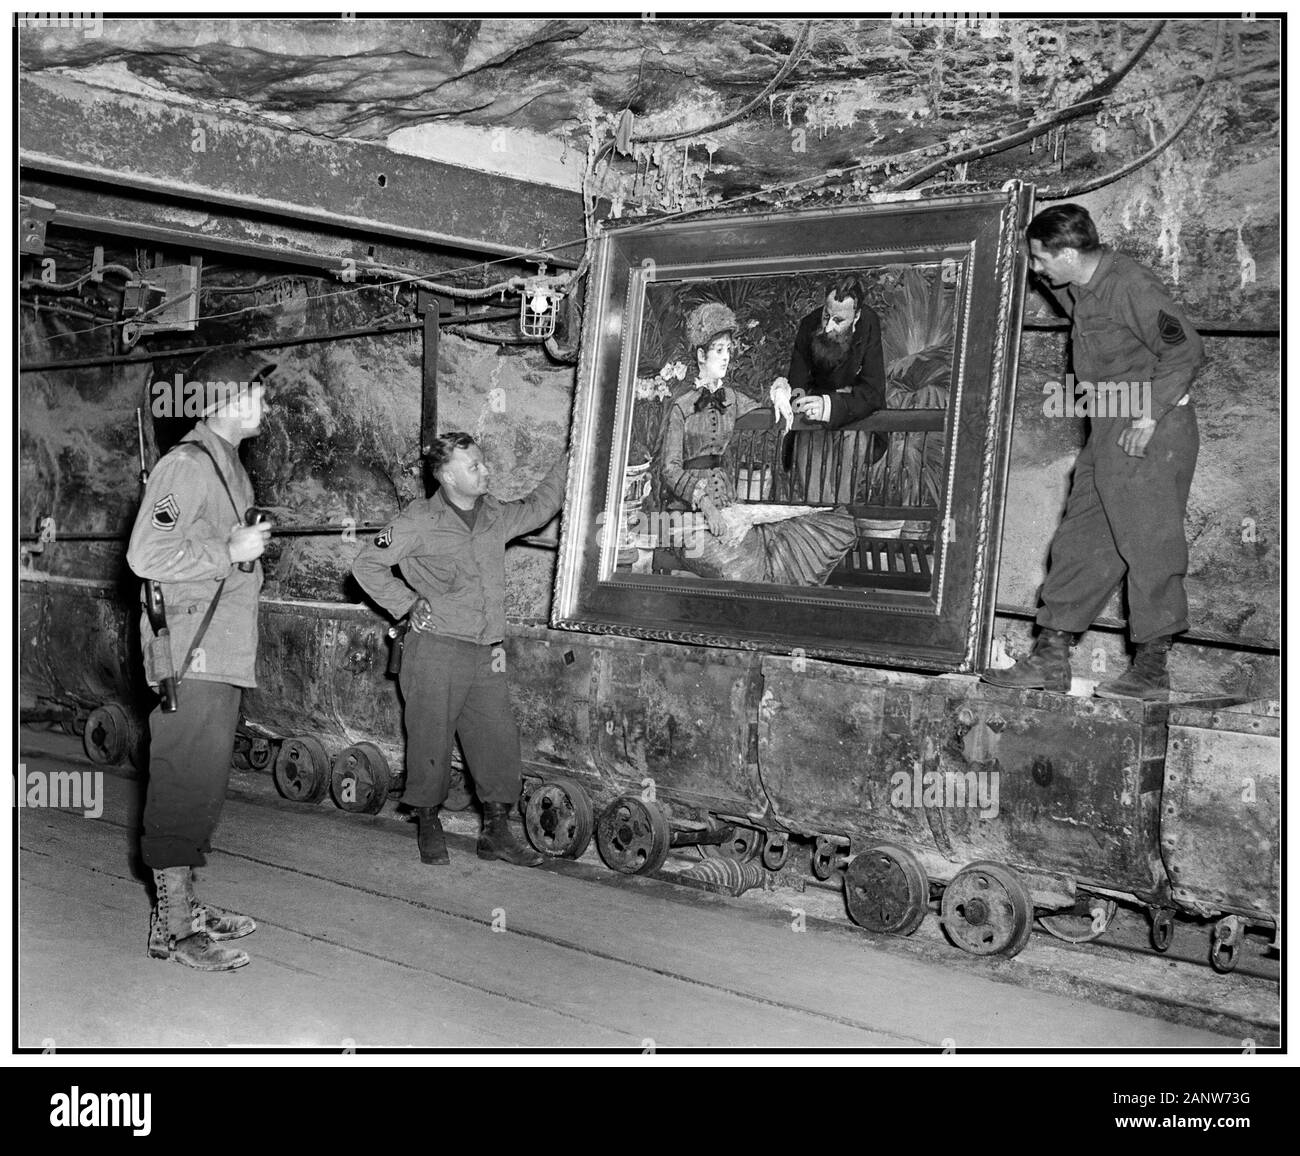 WW2 NAZI ART LOOT PLUNDER LOOTED STOLEN ARTWORK  A painting by the French Impressionist Edouard Manet, titled 'Dans la serre', discovered by American army GI’s in a vault at Merkers mine. Germany, 25 April 1945. Stock Photo